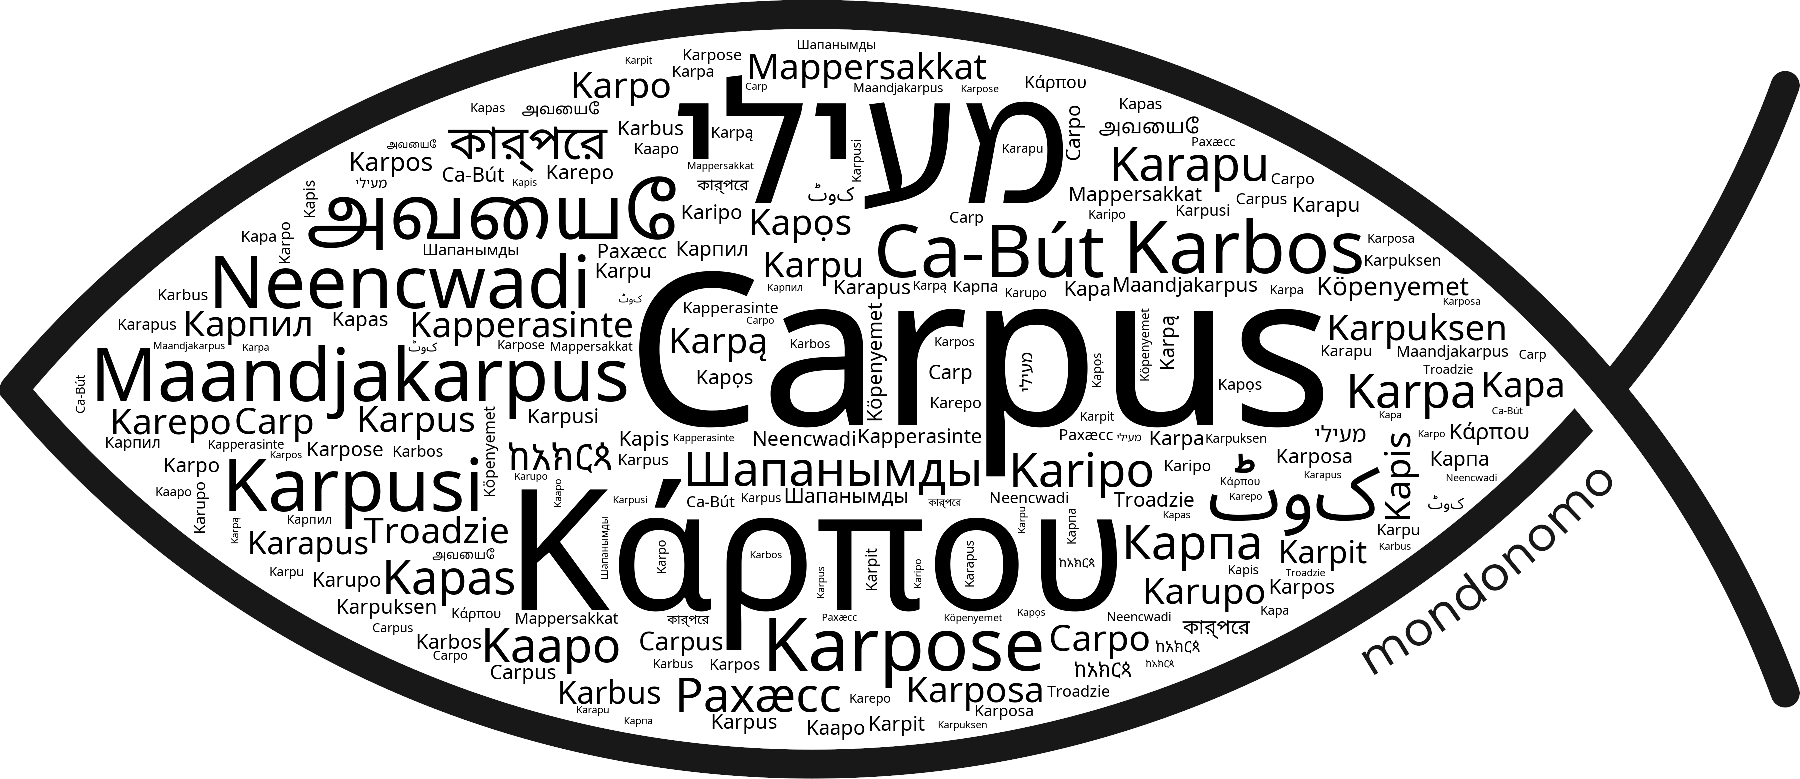 Name Carpus in the world's Bibles